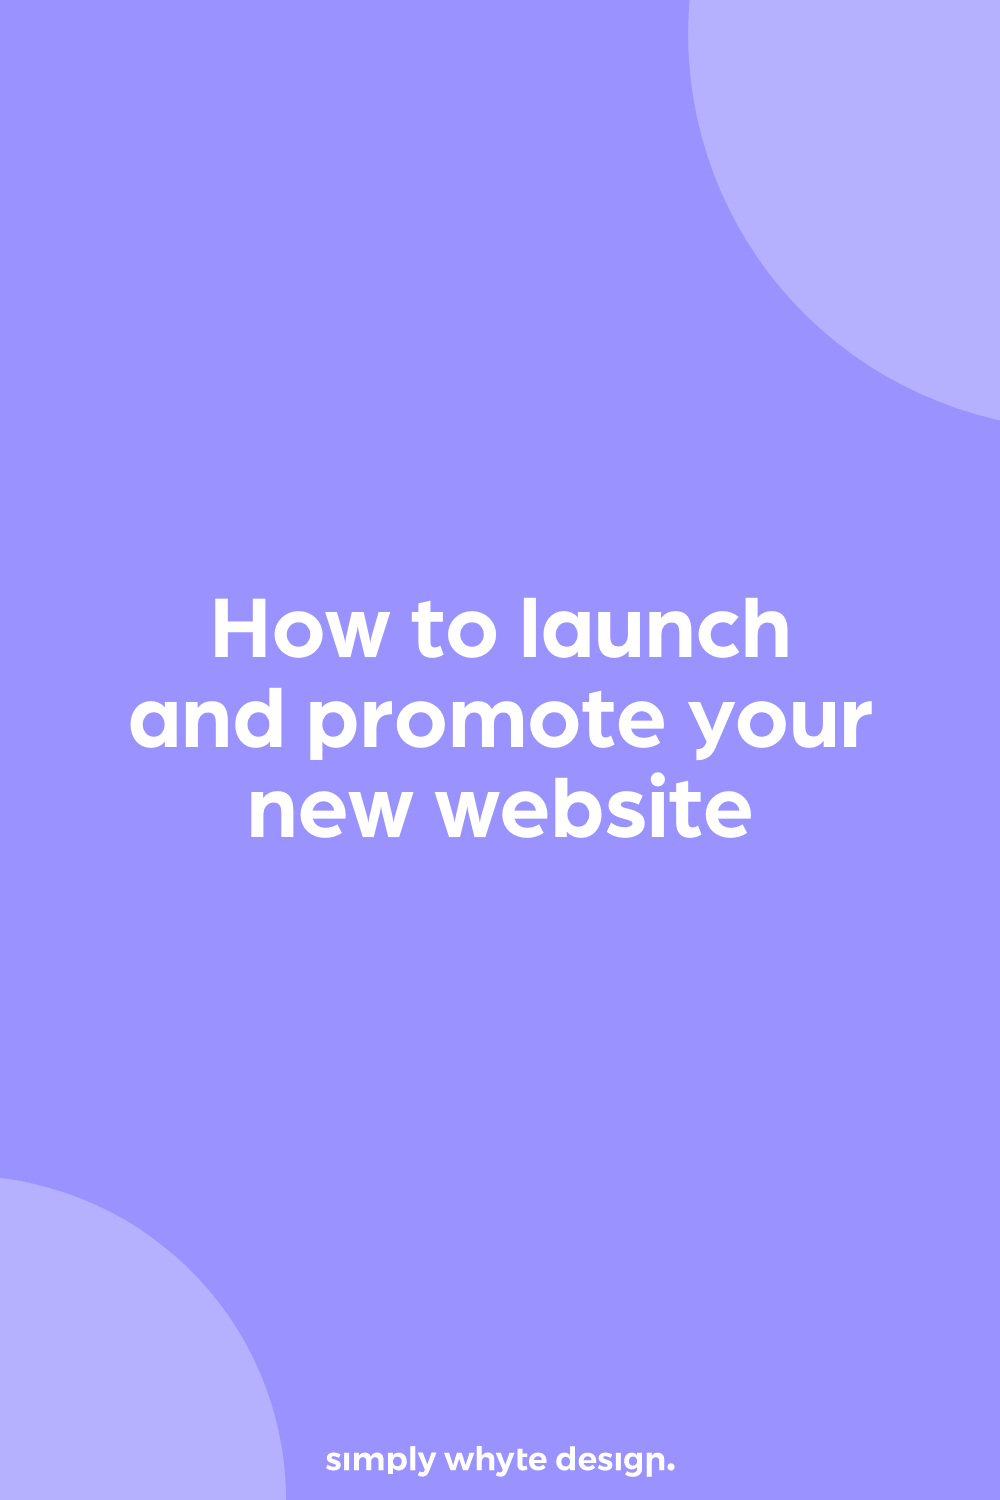 How to launch and promote your new website3.png